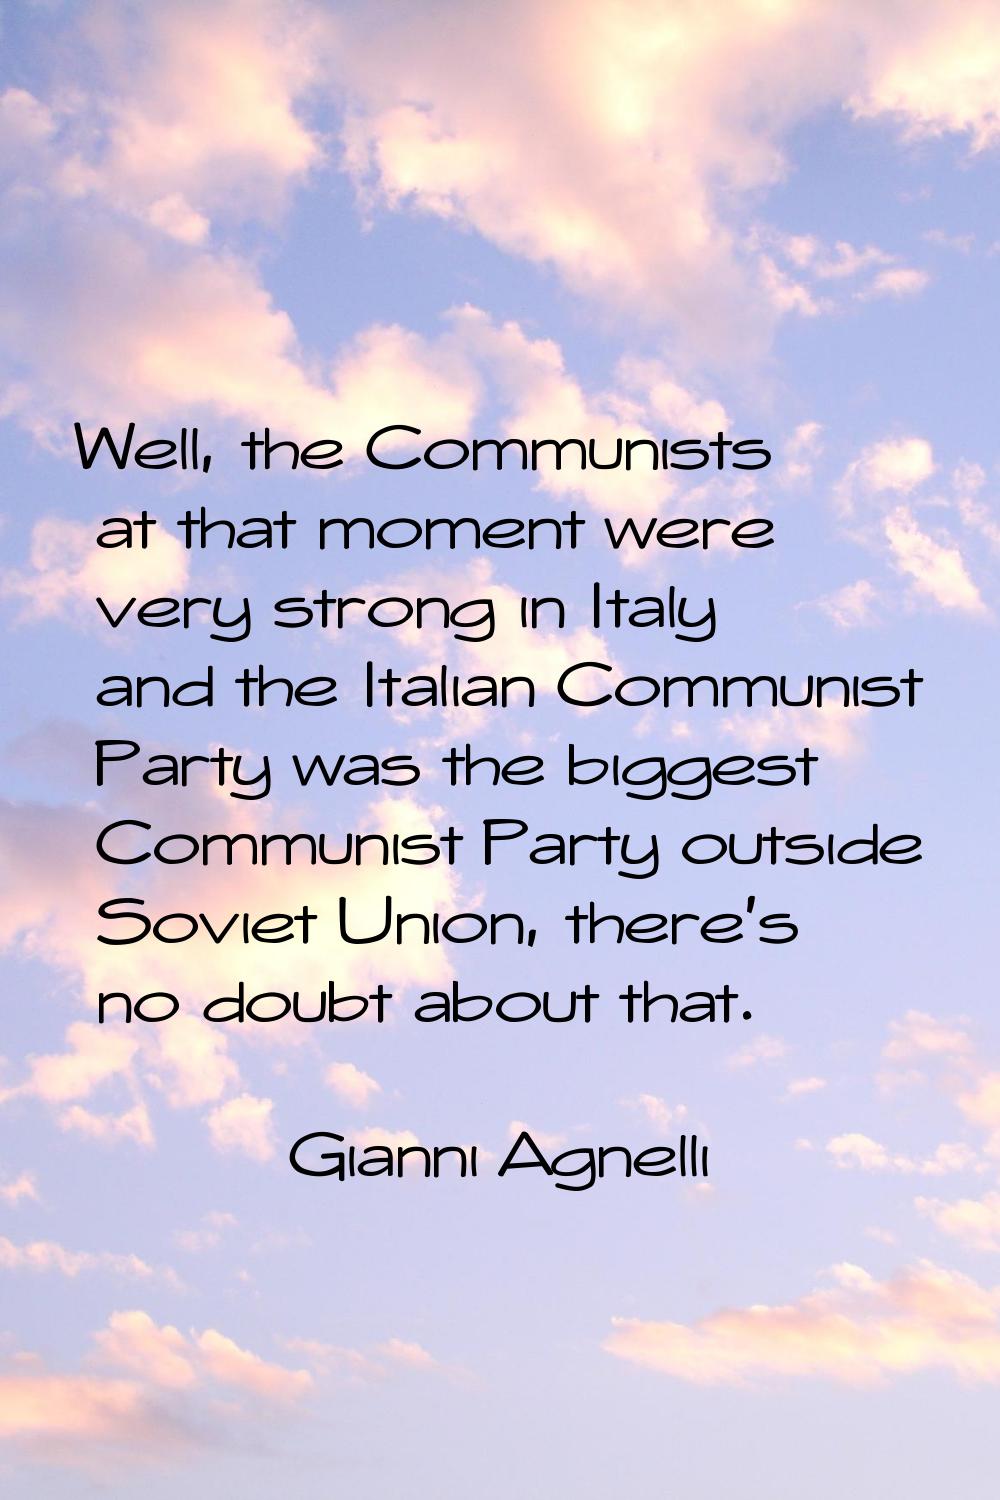 Well, the Communists at that moment were very strong in Italy and the Italian Communist Party was t